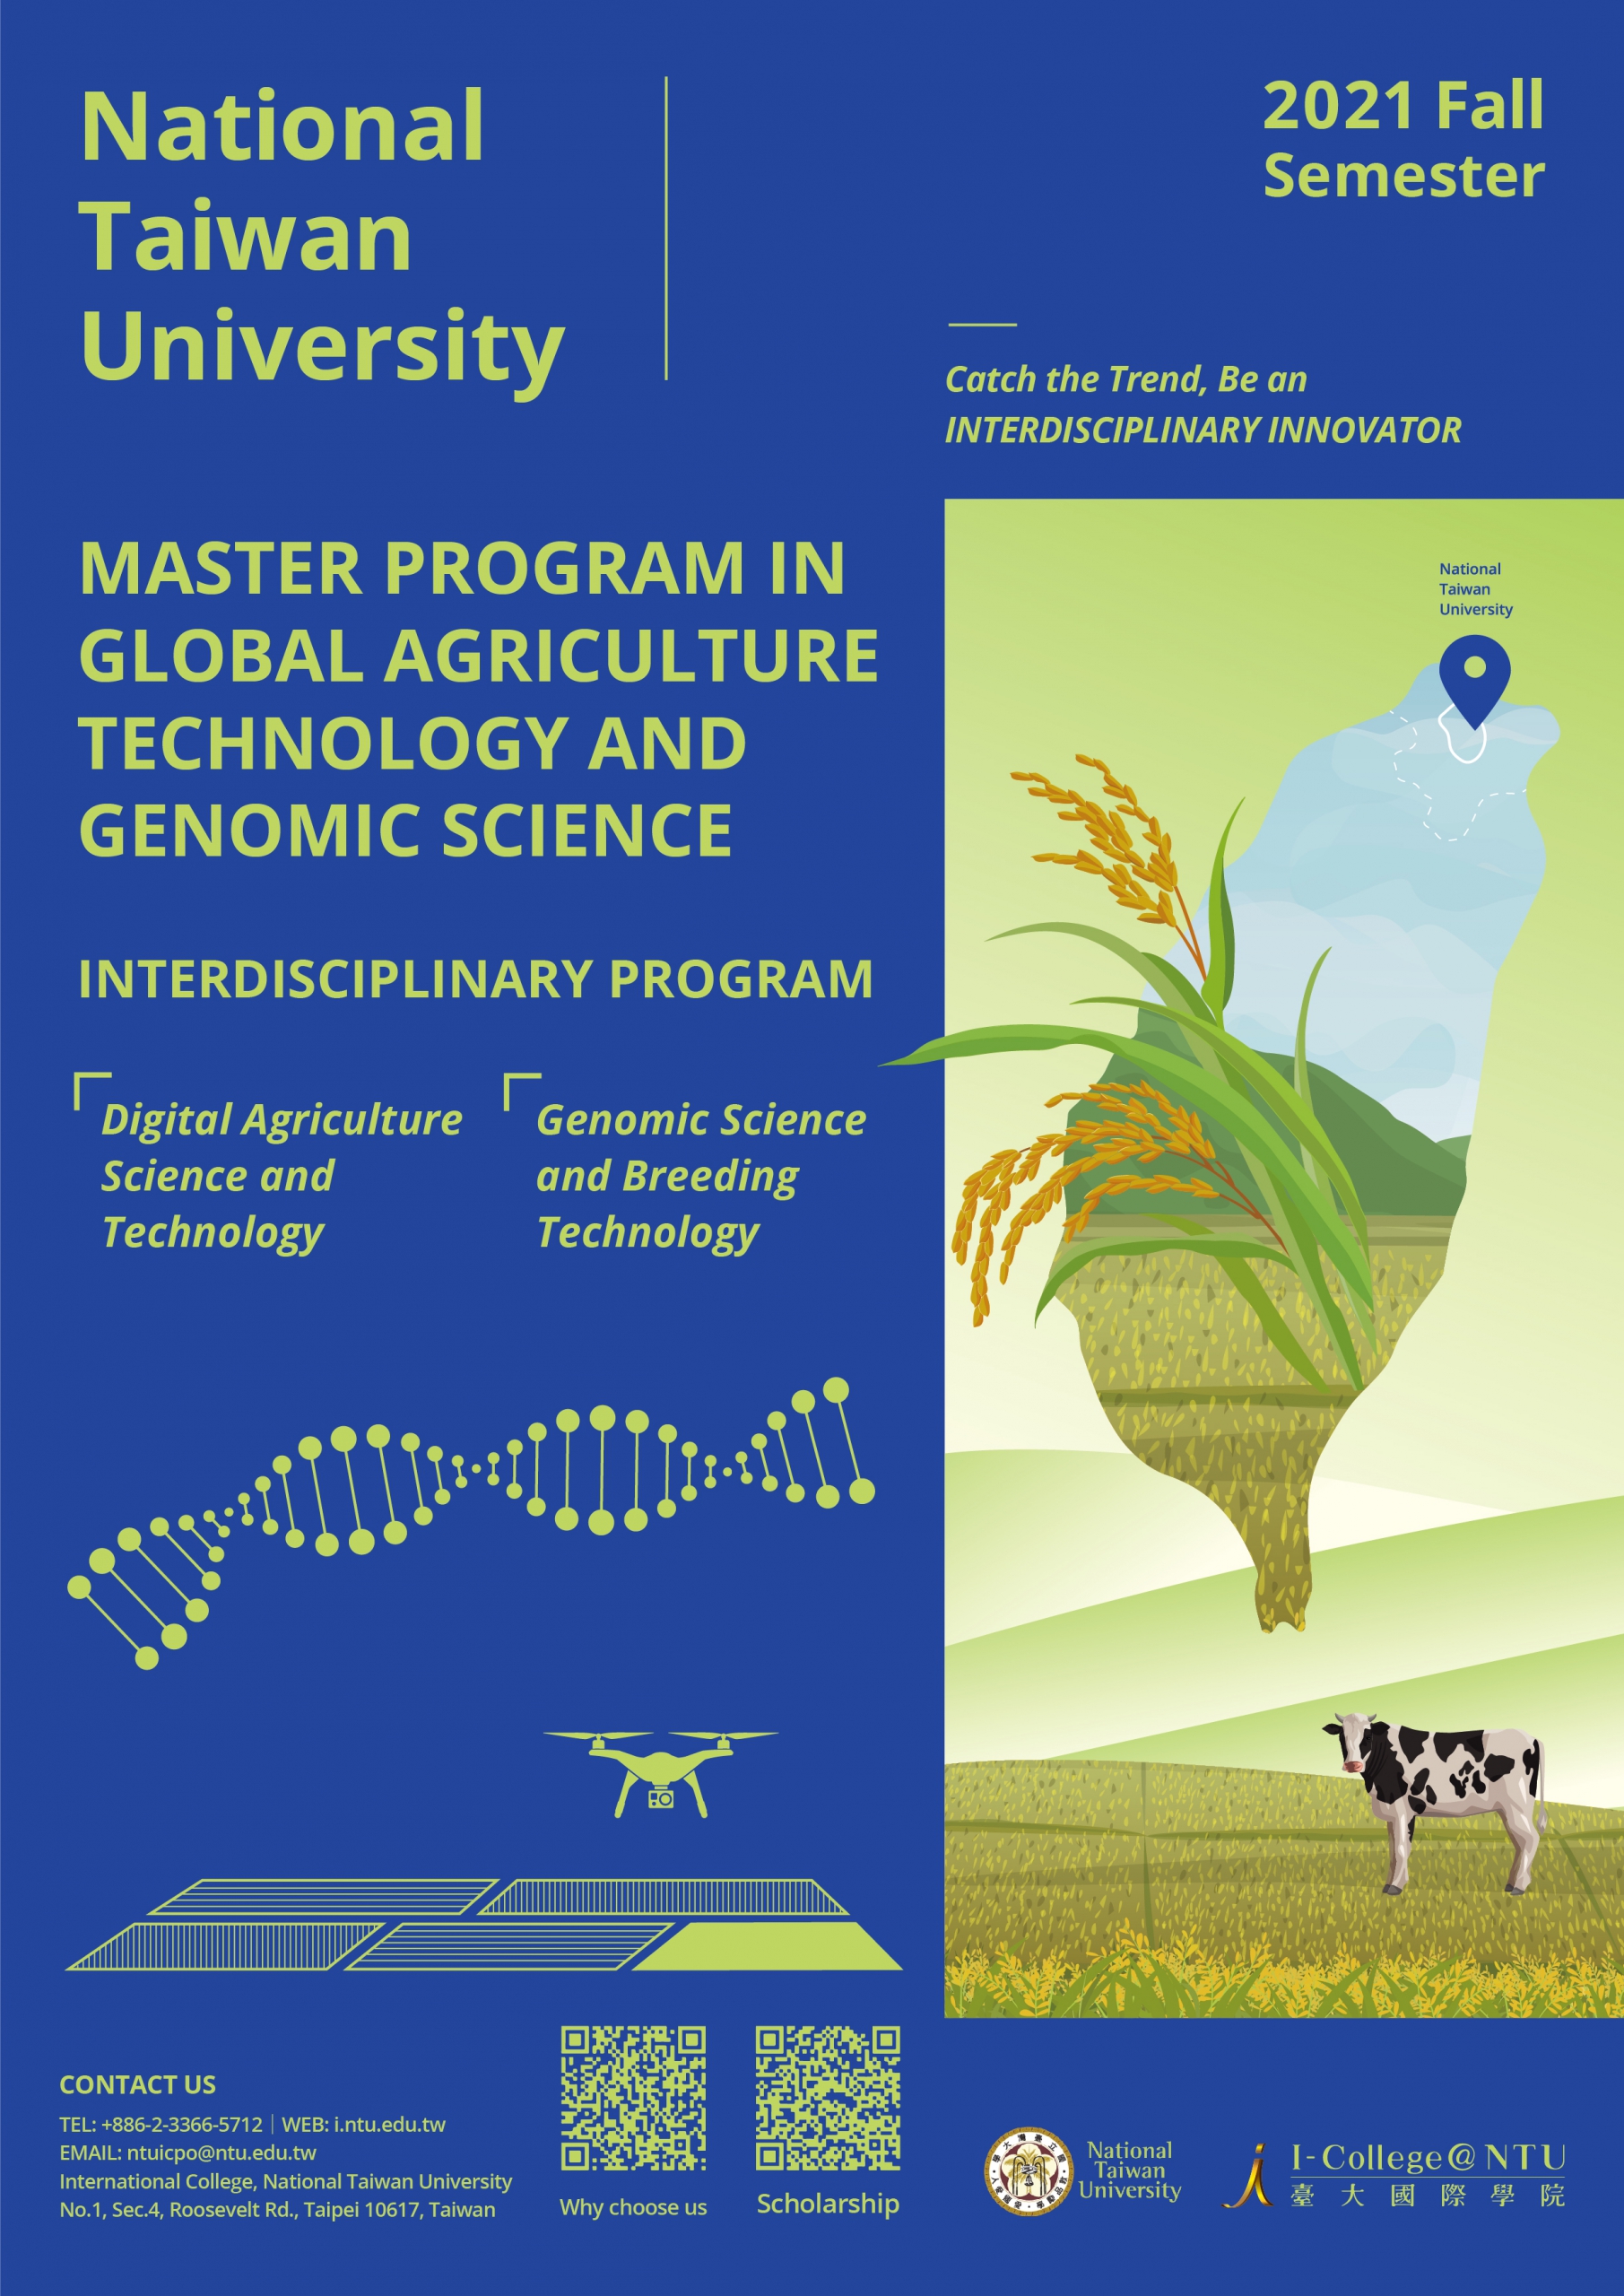 [2020.8.7] Master Program in Global Agriculture Technology and Genomic Science (Global ATGS) , National Taiwan University